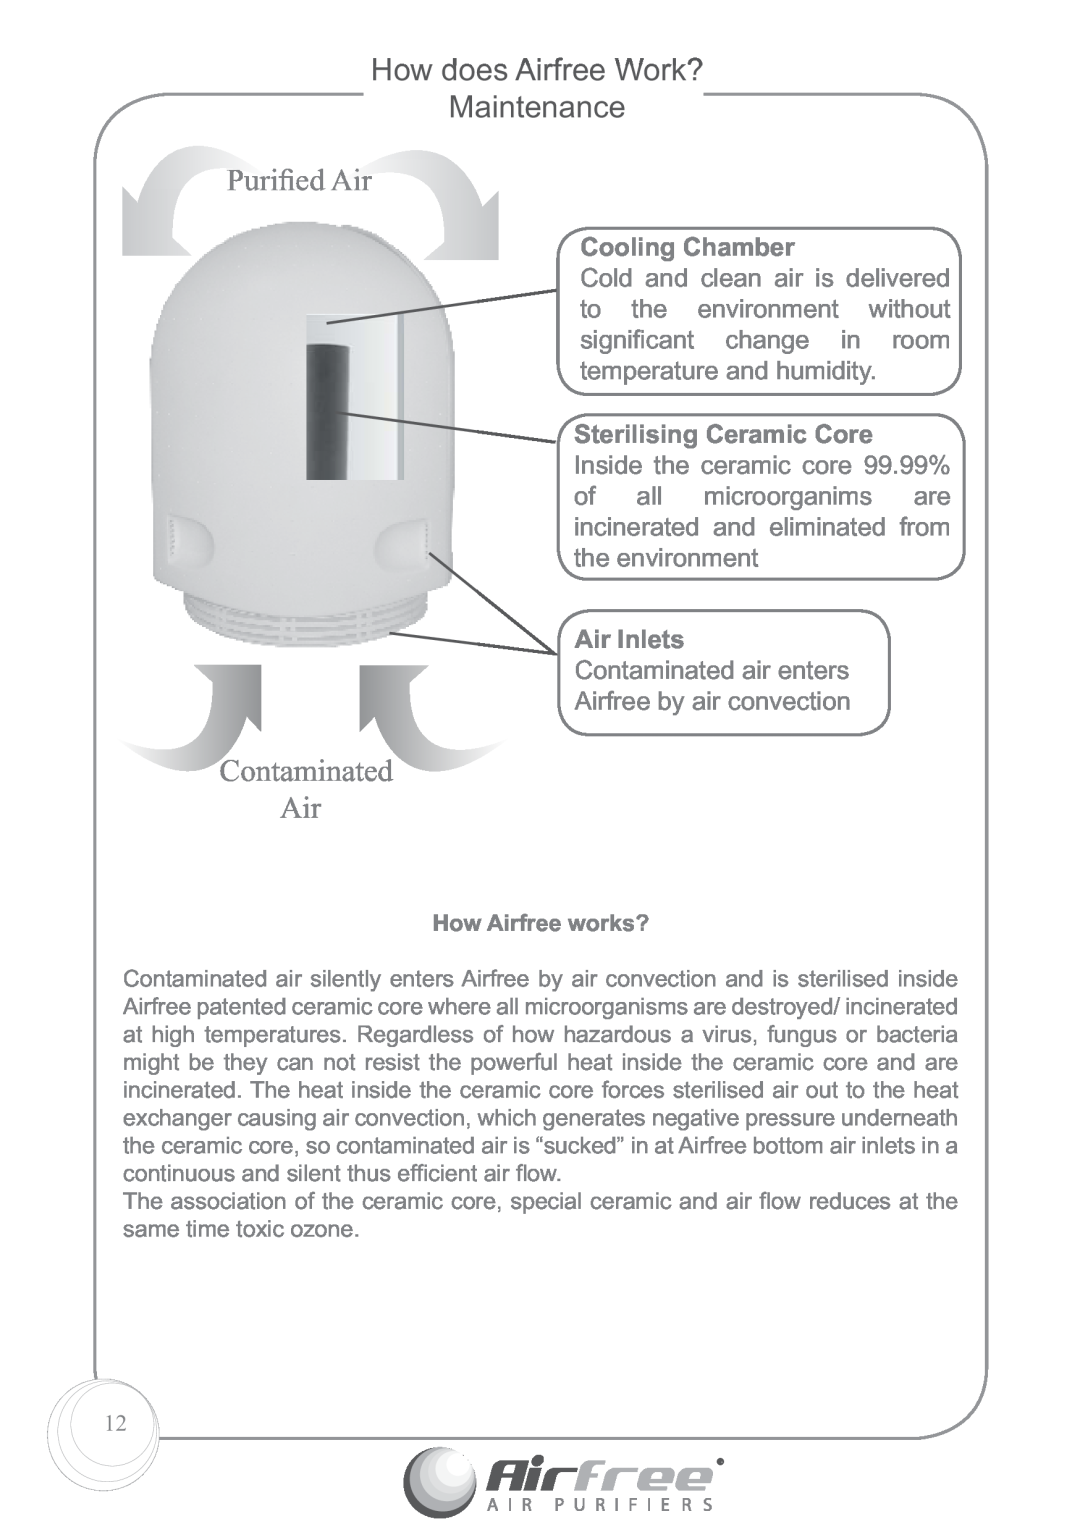 Airfree P60, P125 How does Airfree Work? Maintenance, Puriﬁed Air, Contaminated Air, Cooling Chamber, Air Inlets 